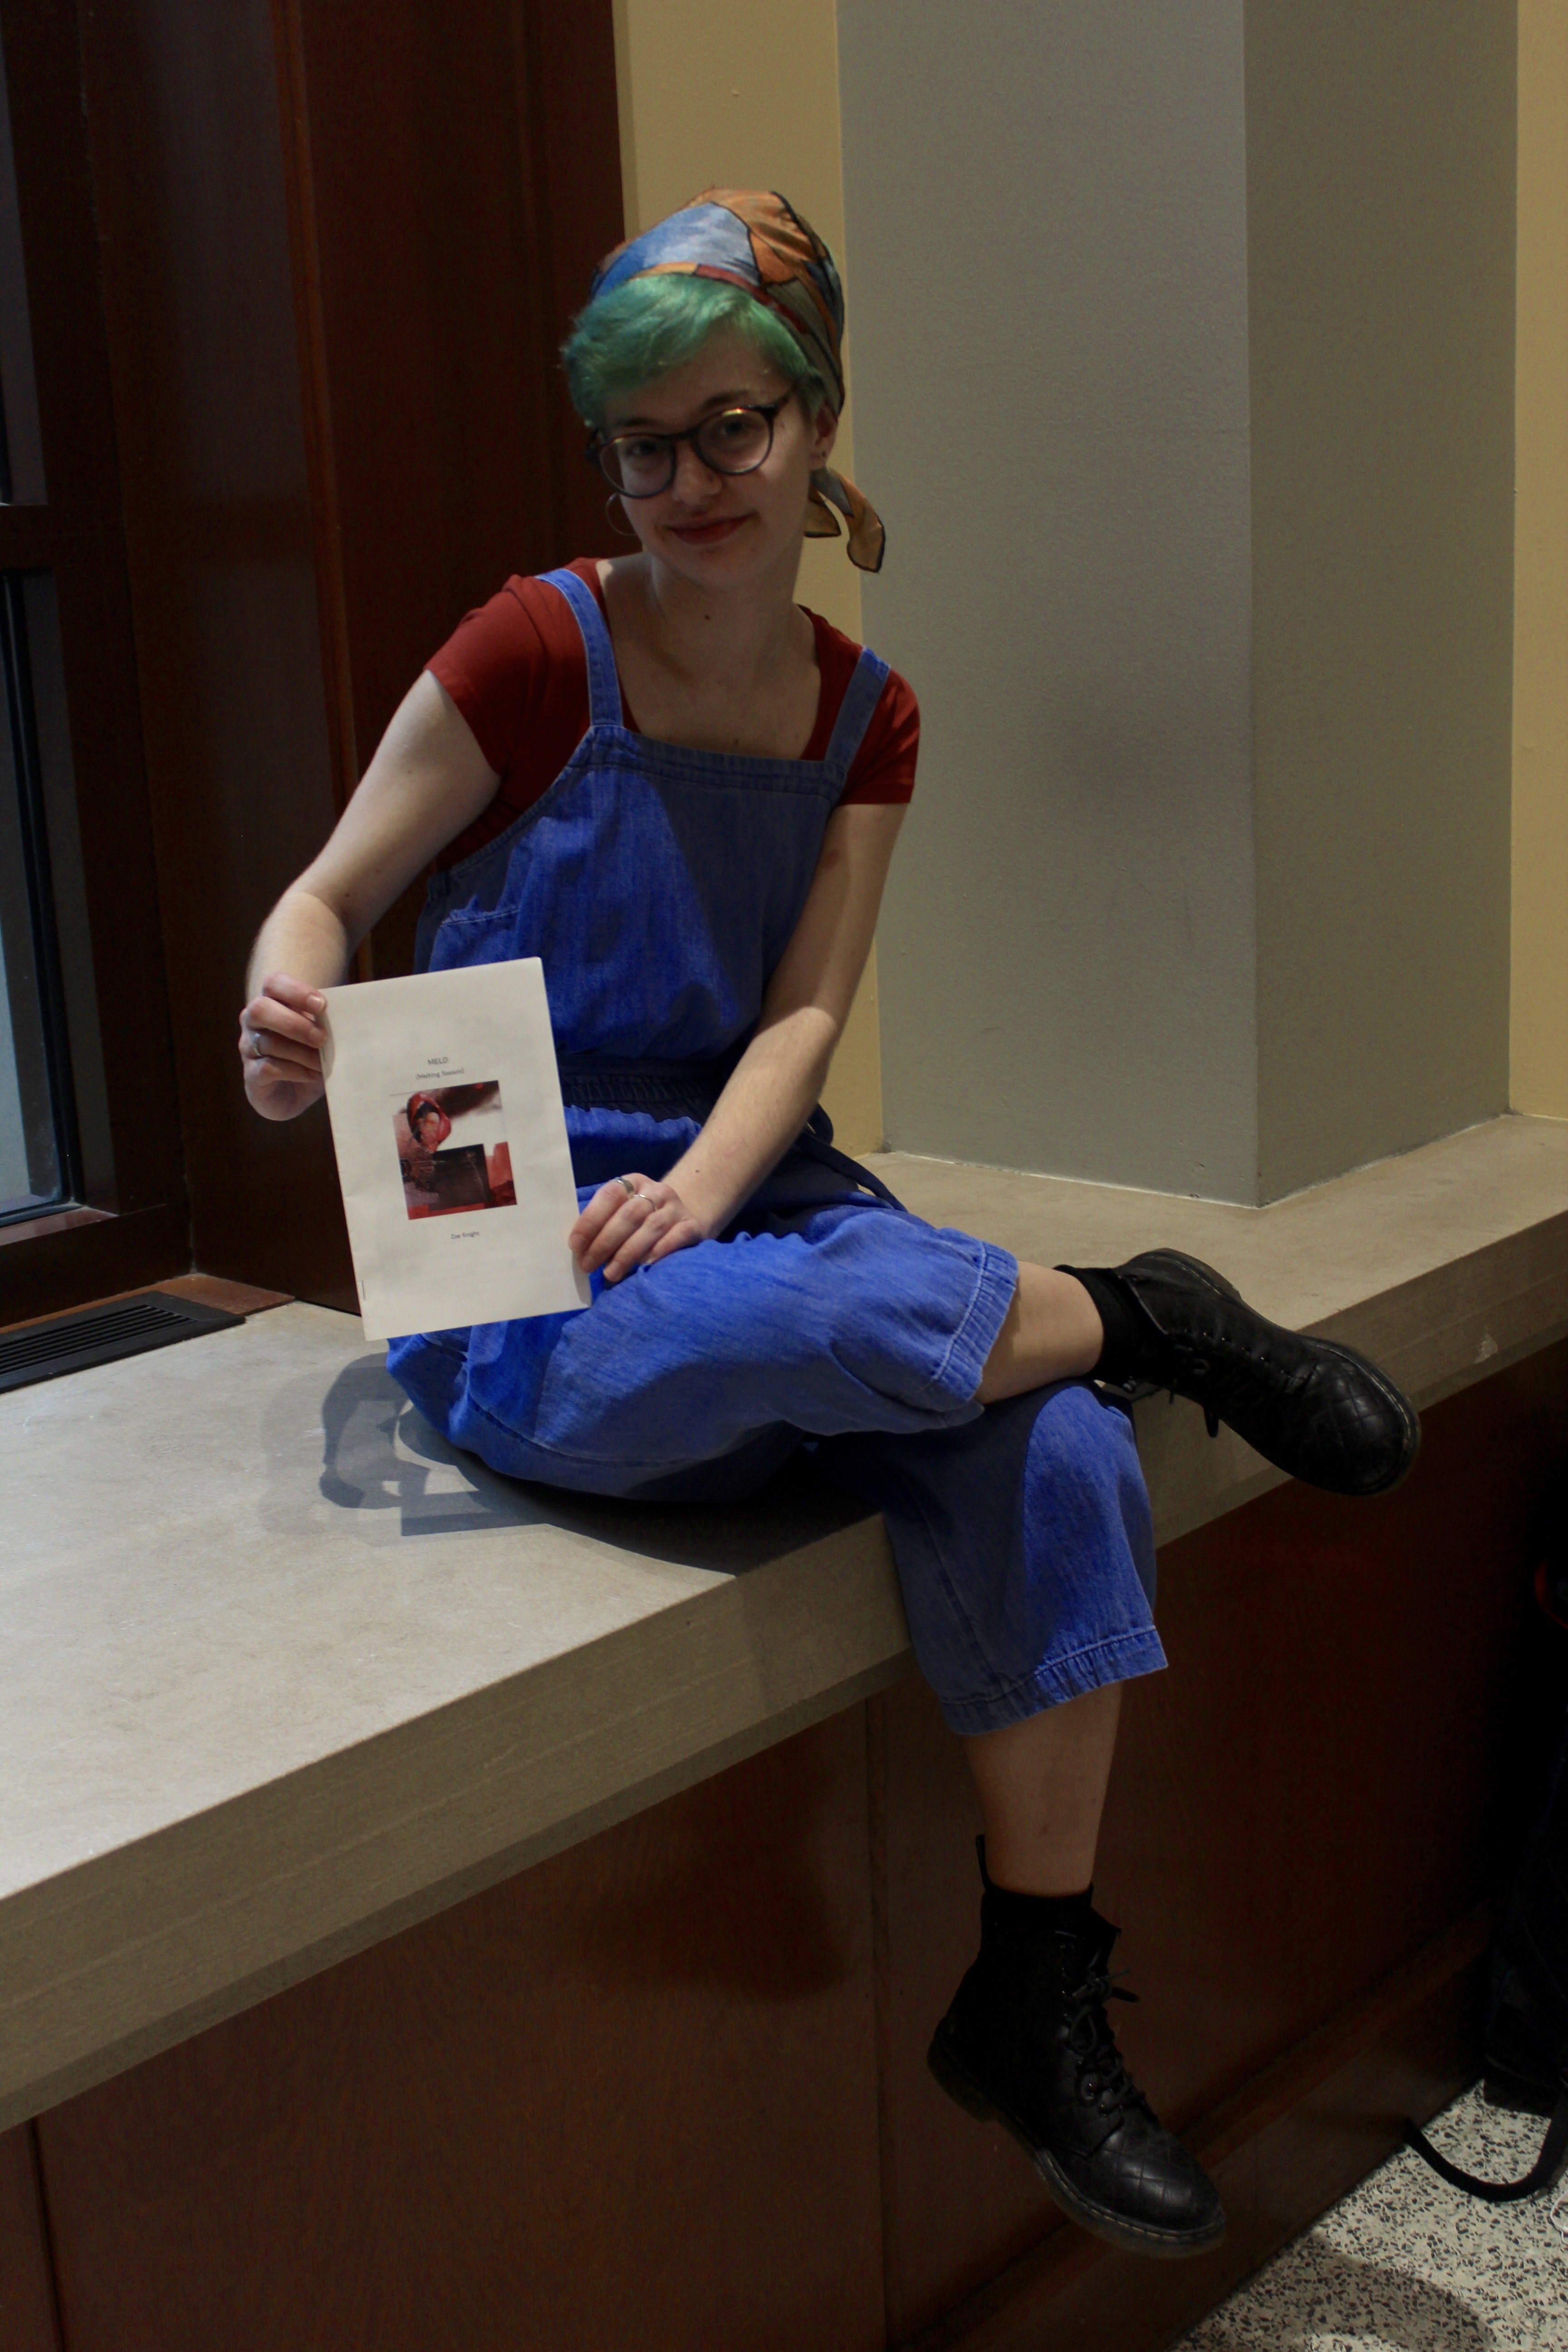 Poet and DePaul student Zoe Knight with her zine, “Melting Season.” (Meredith Melland, 14 East)